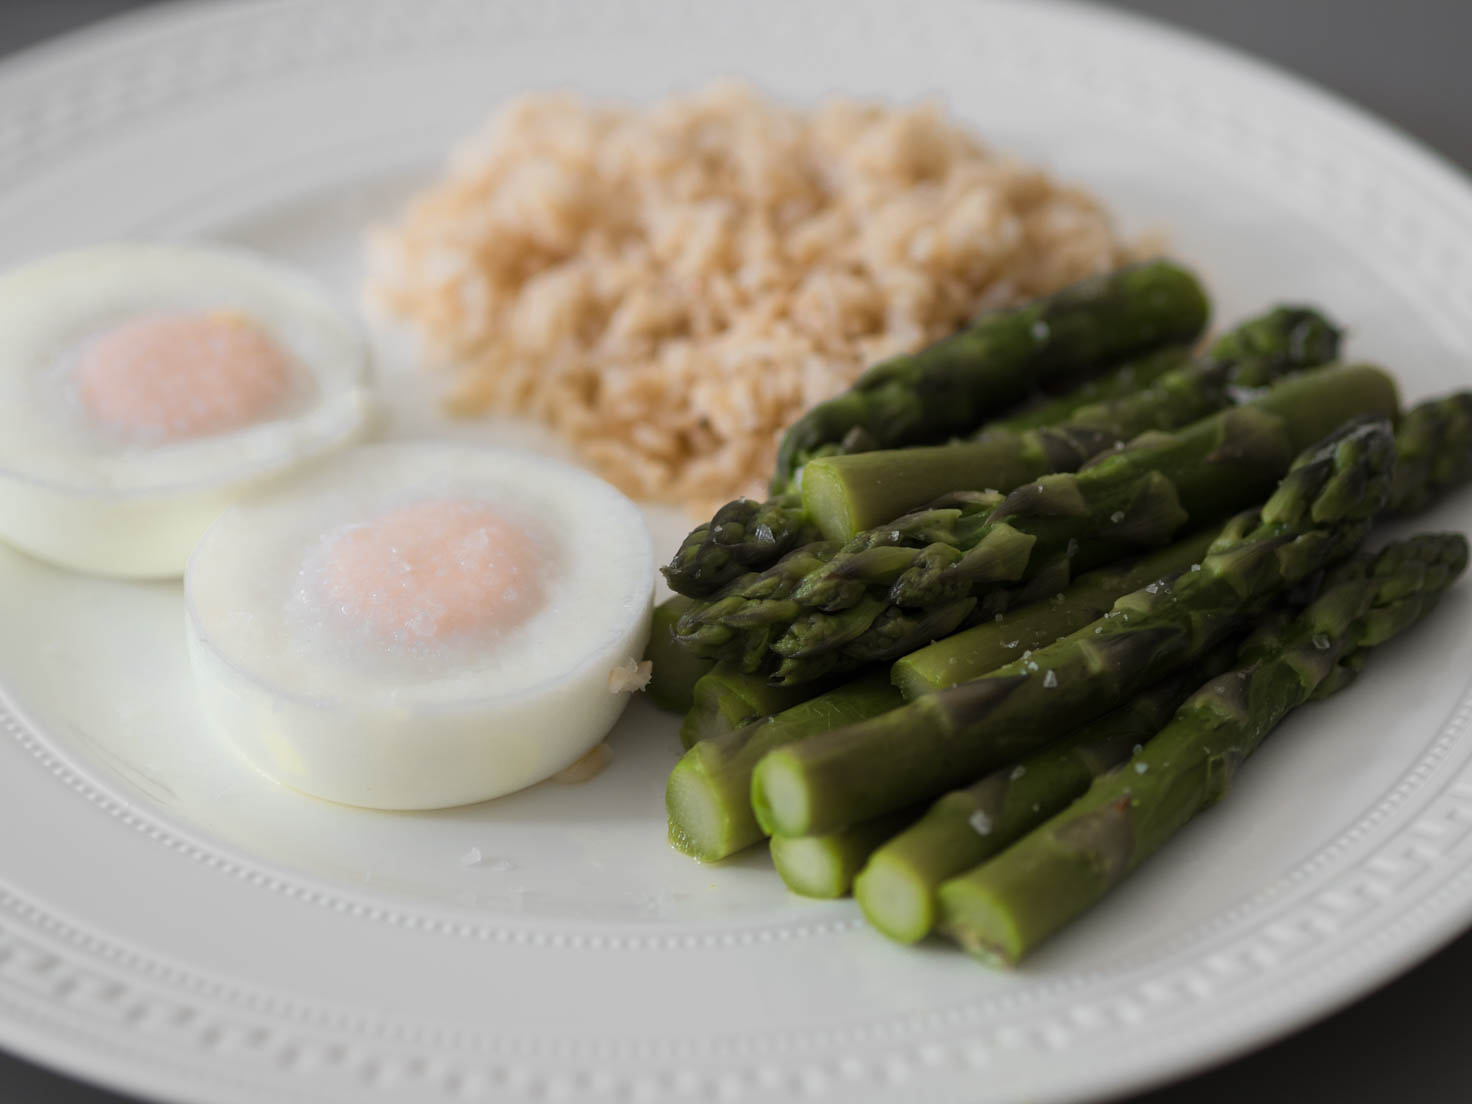 Poached eggs with asparagus and wholegrain rice